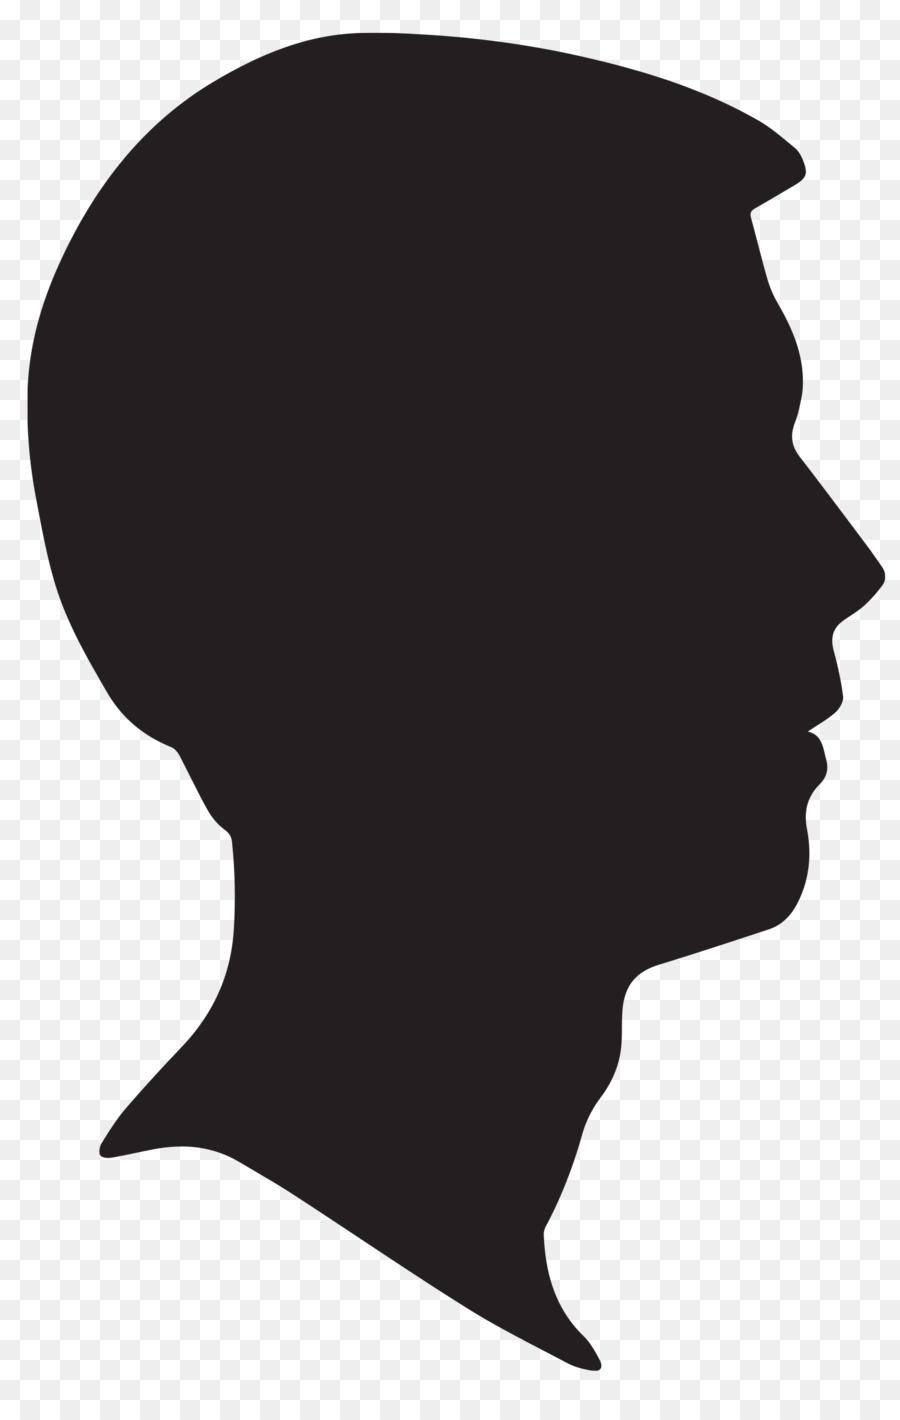 Female Silhouette Clip art - Silhouette Profile png download - 900*1412 - Free Transparent Male png Download.